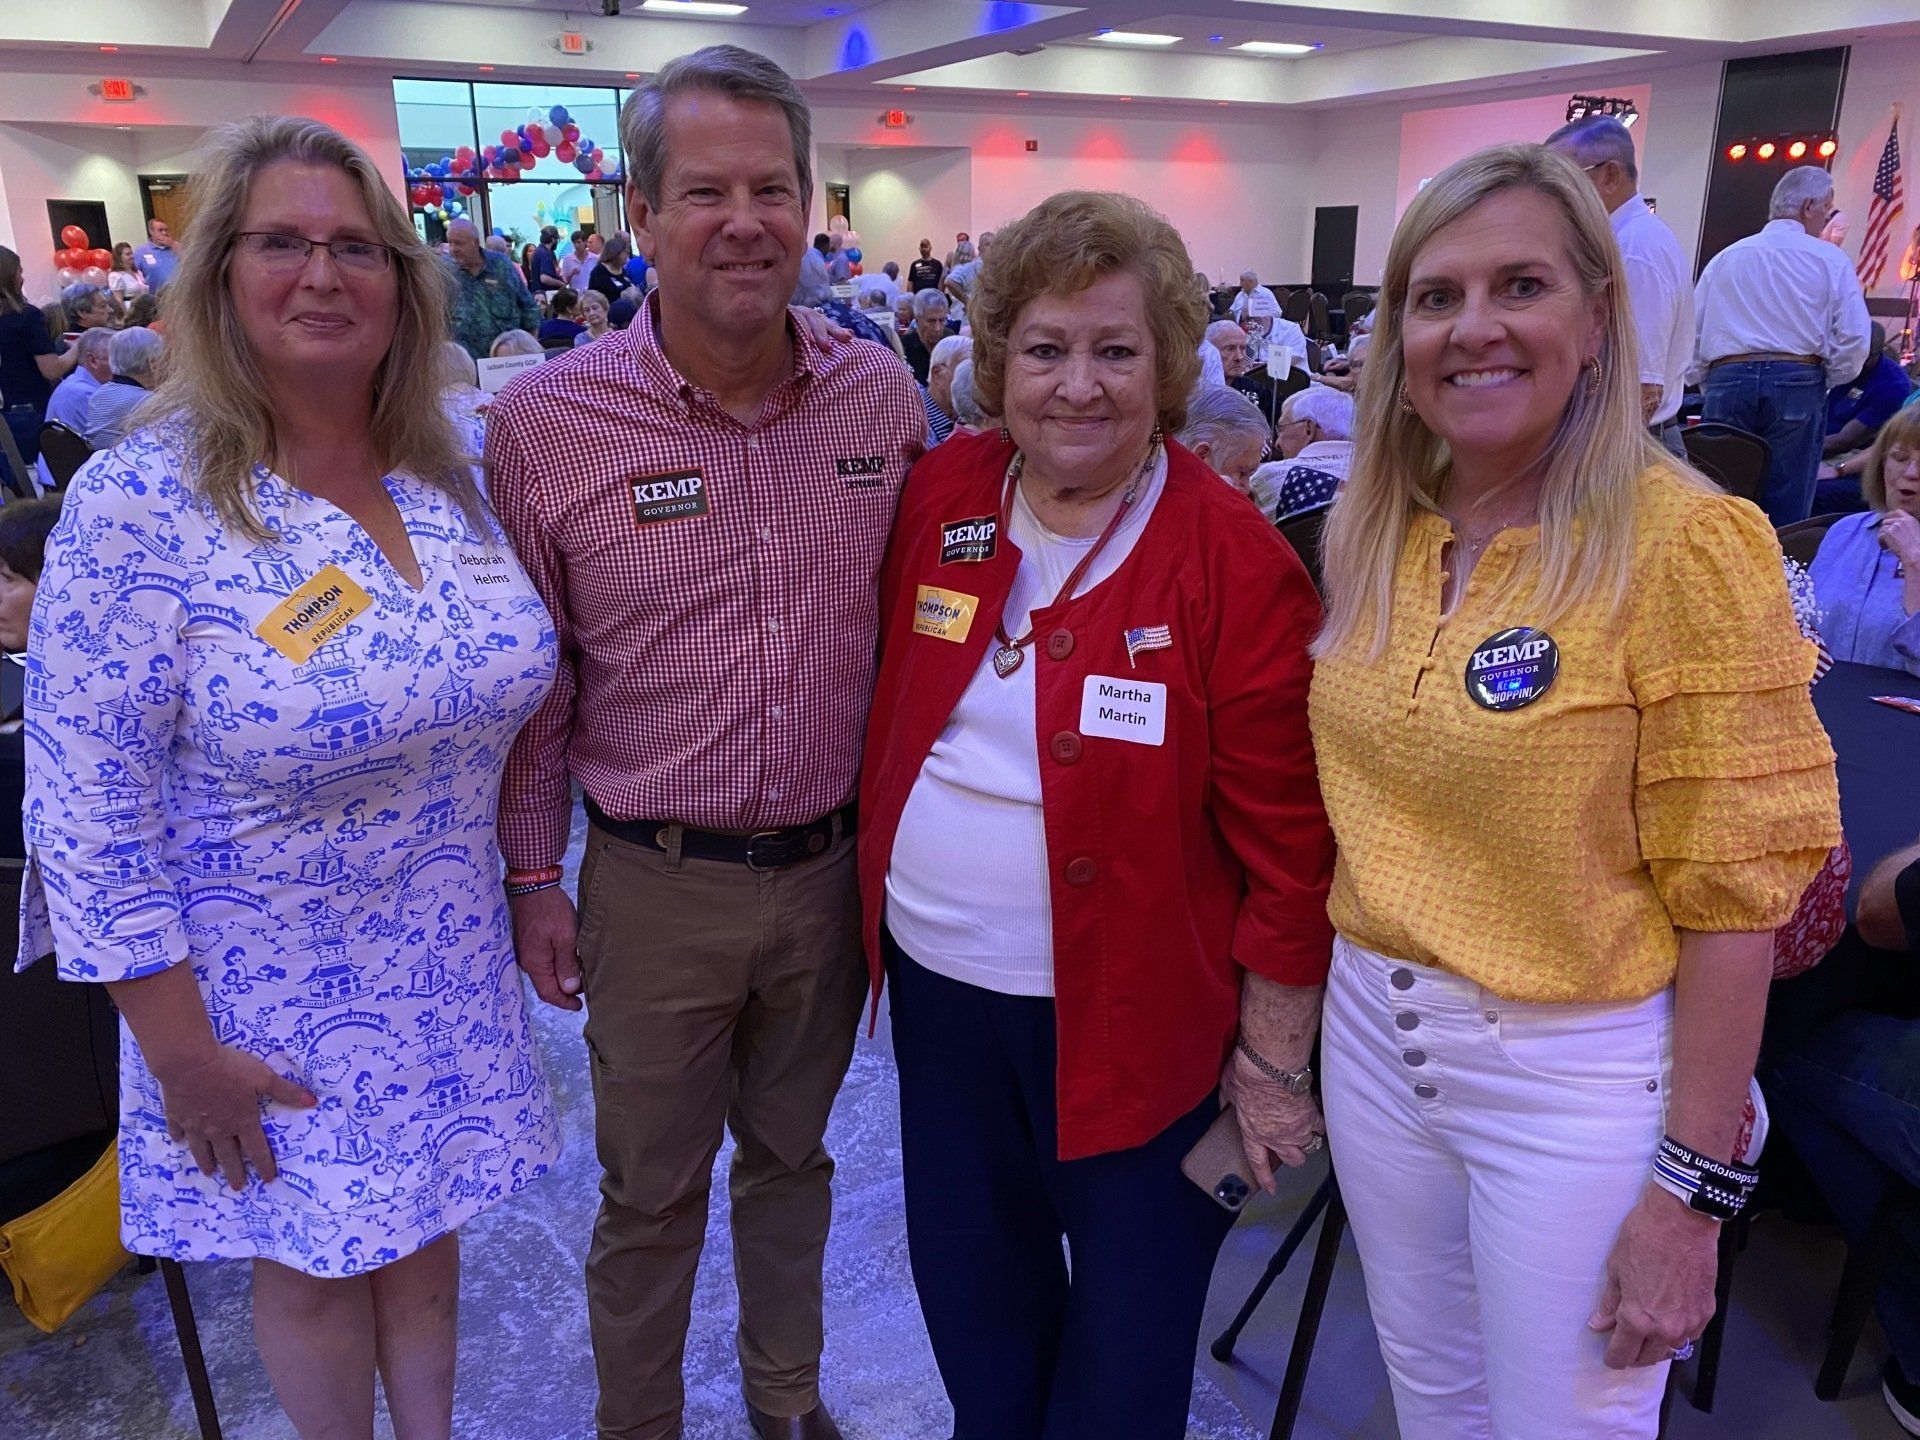 Jackson county Republican Party event